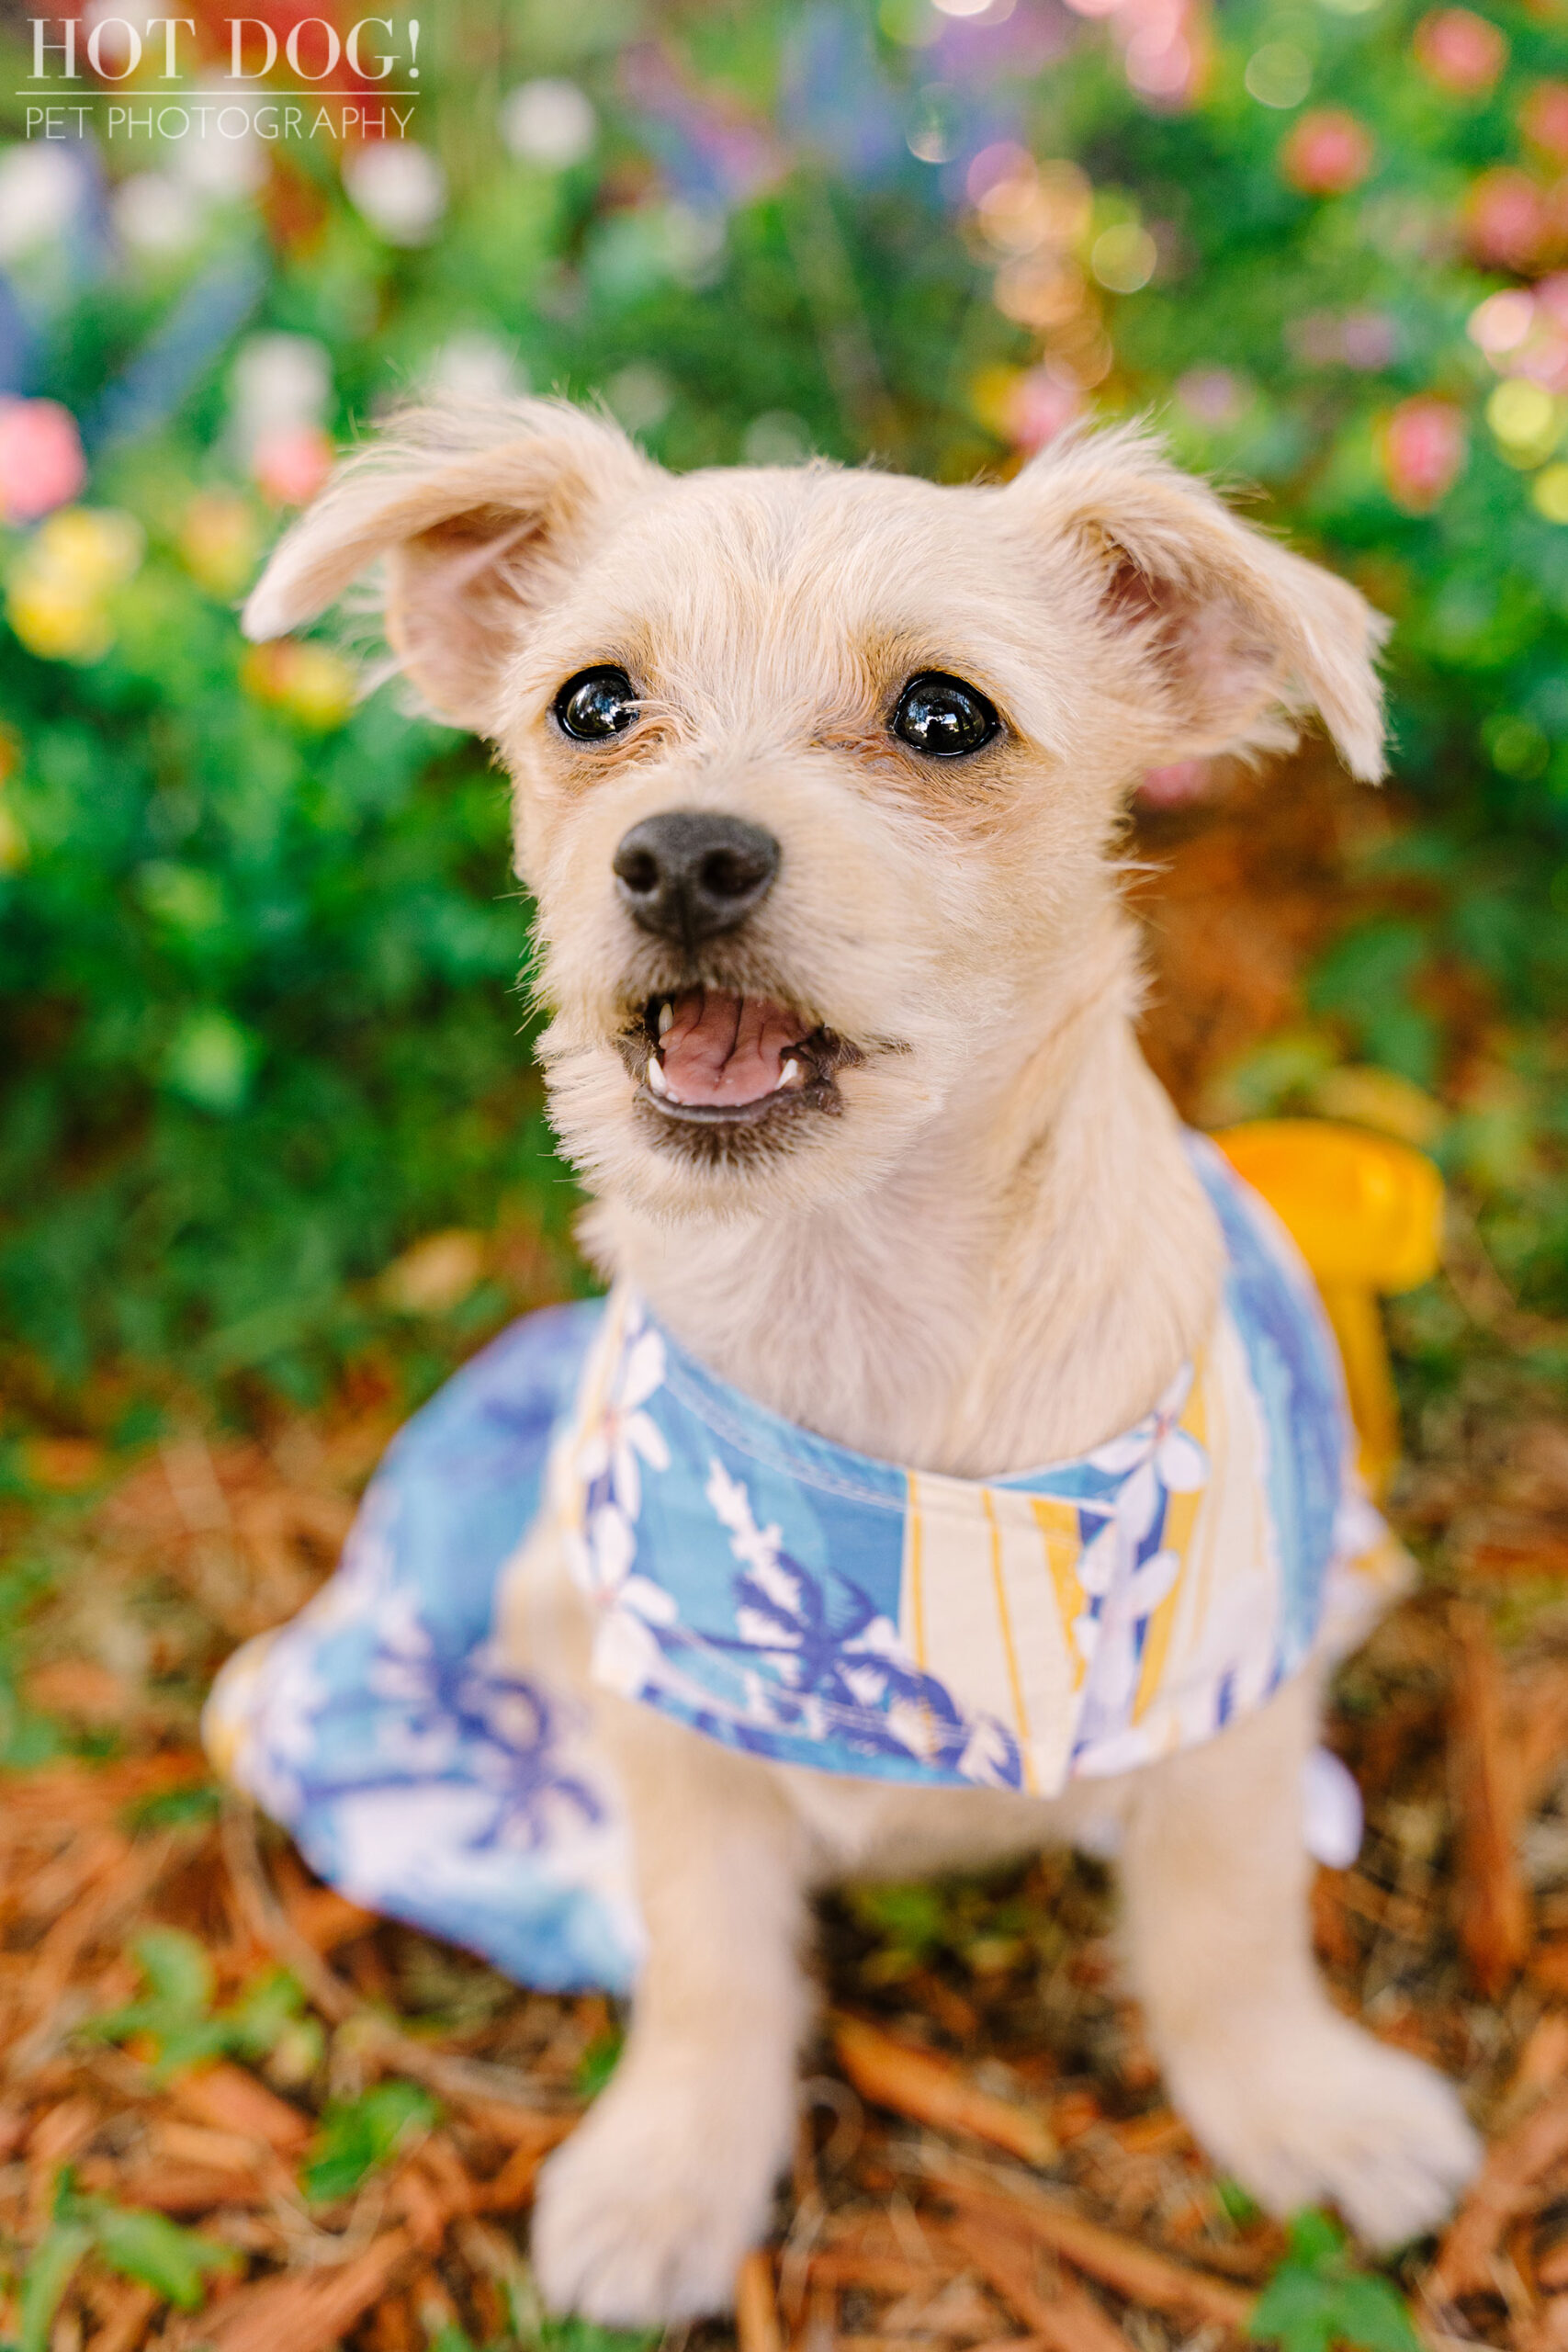 Malchipoo puppies are the stars of this adorable pet photo session in Orlando by Hot Dog! Pet Photography.